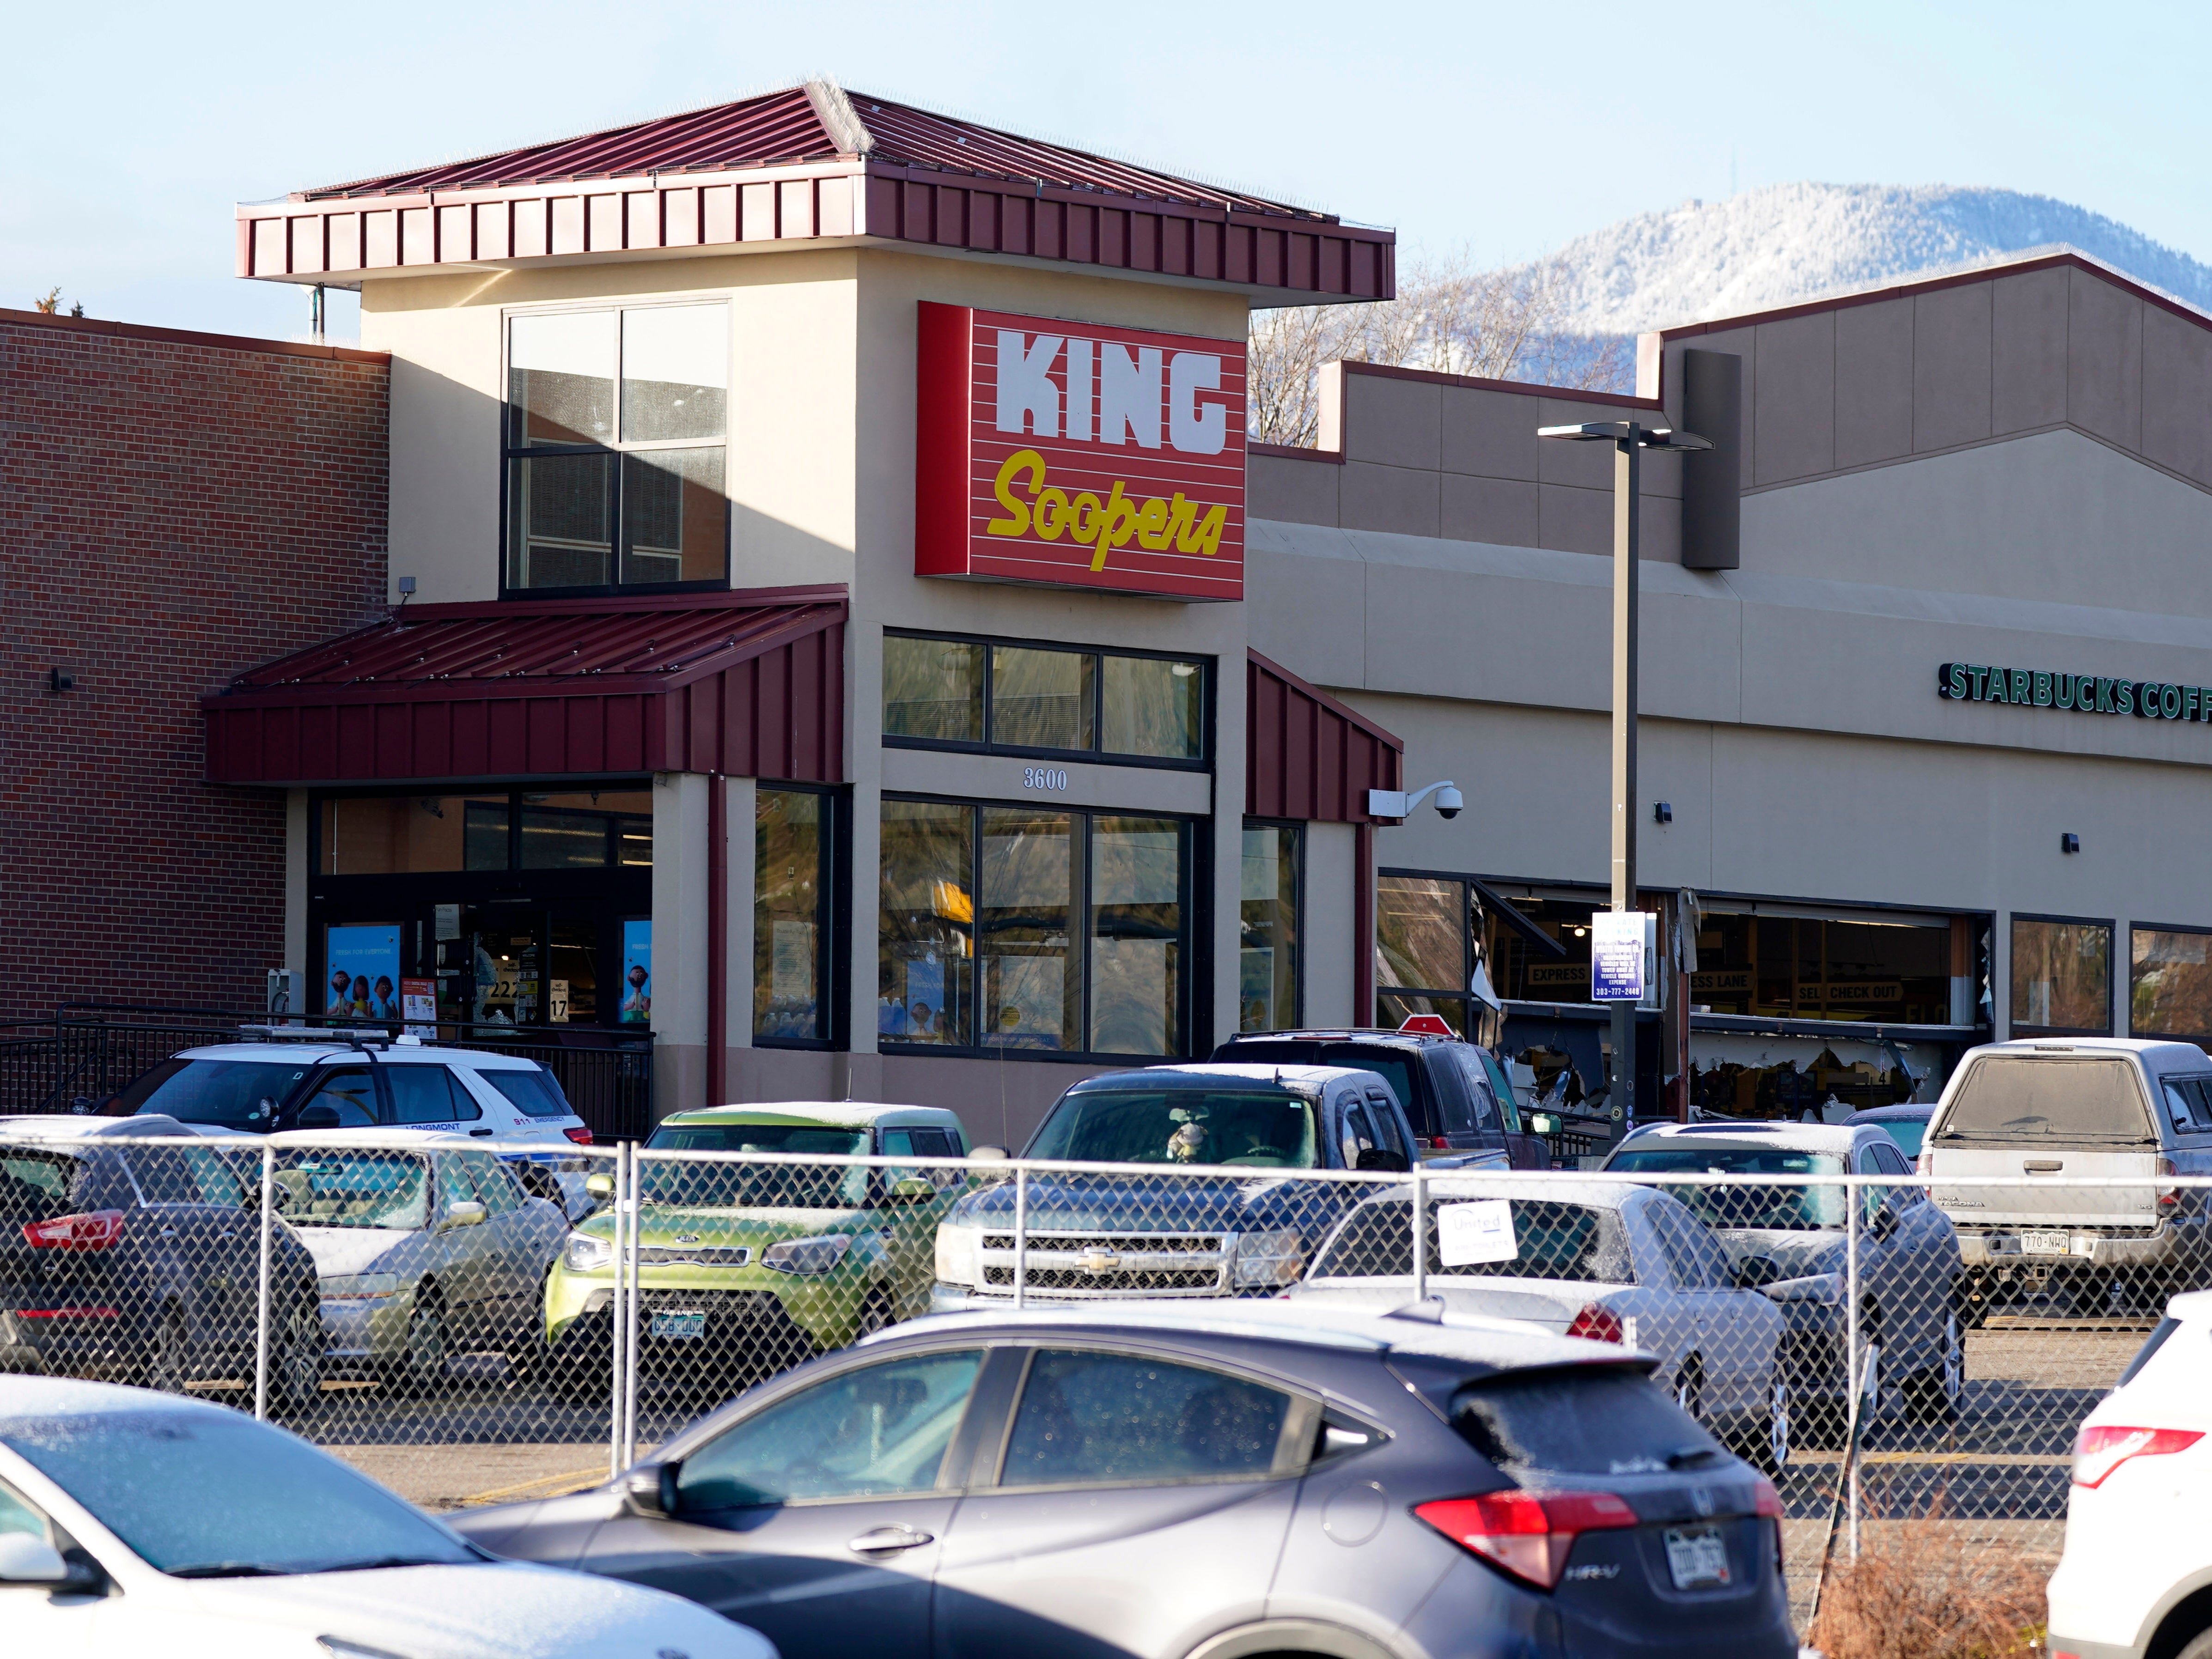 A makeshift fence stands around the parking lot outside a King Soopers grocery store where a mass shooting took place a day earlier in Boulder, Colorado